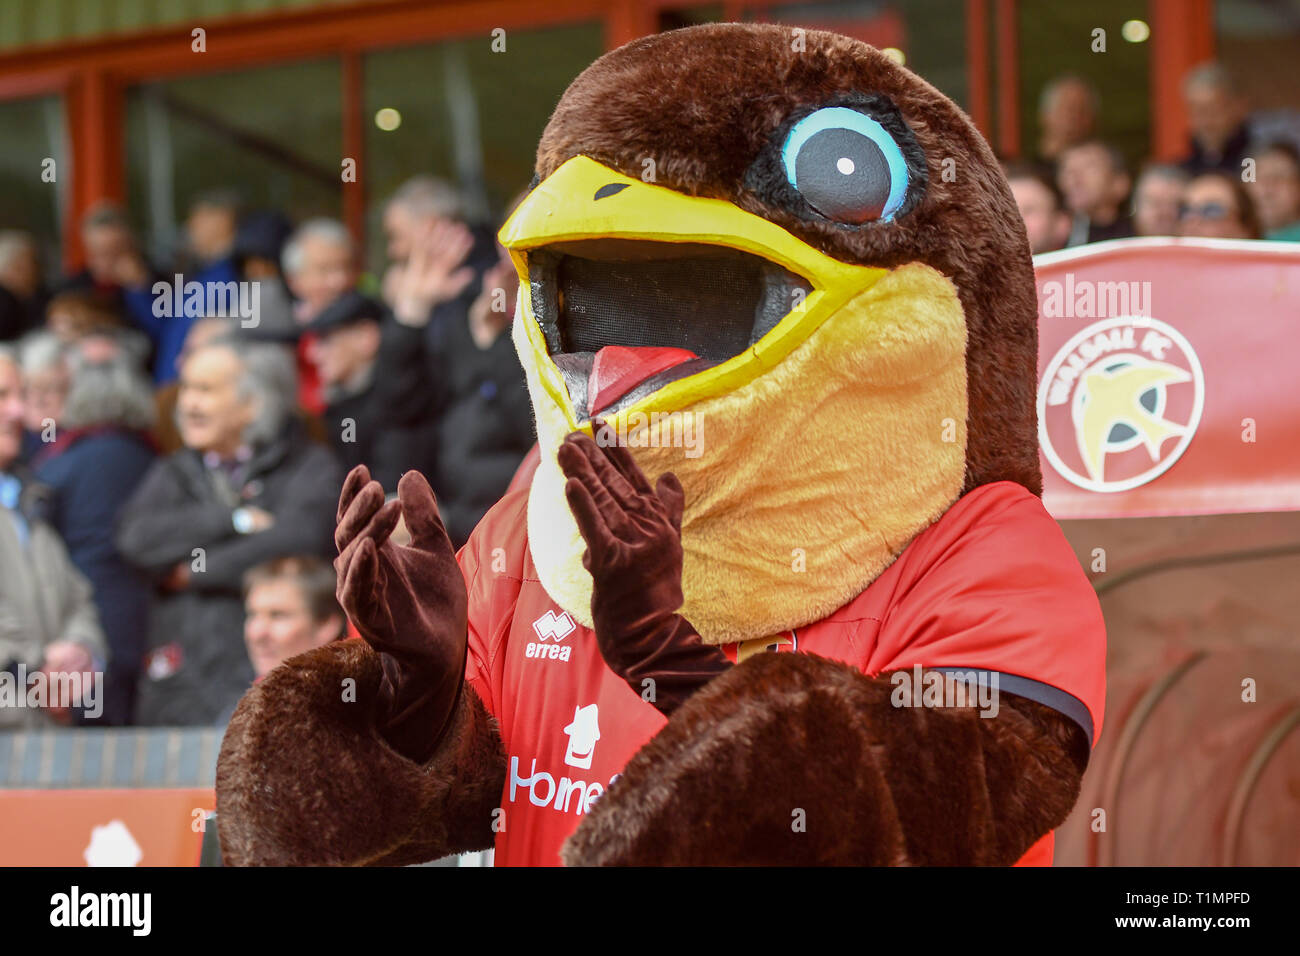 23rd March 2019, Bescot Stadium, Walsall, England; Sky Bet League One, Walsall vs Barnsley ; Walsall Mascot   Credit: Gareth Dalley/News Images  English Football League images are subject to DataCo Licence Stock Photo